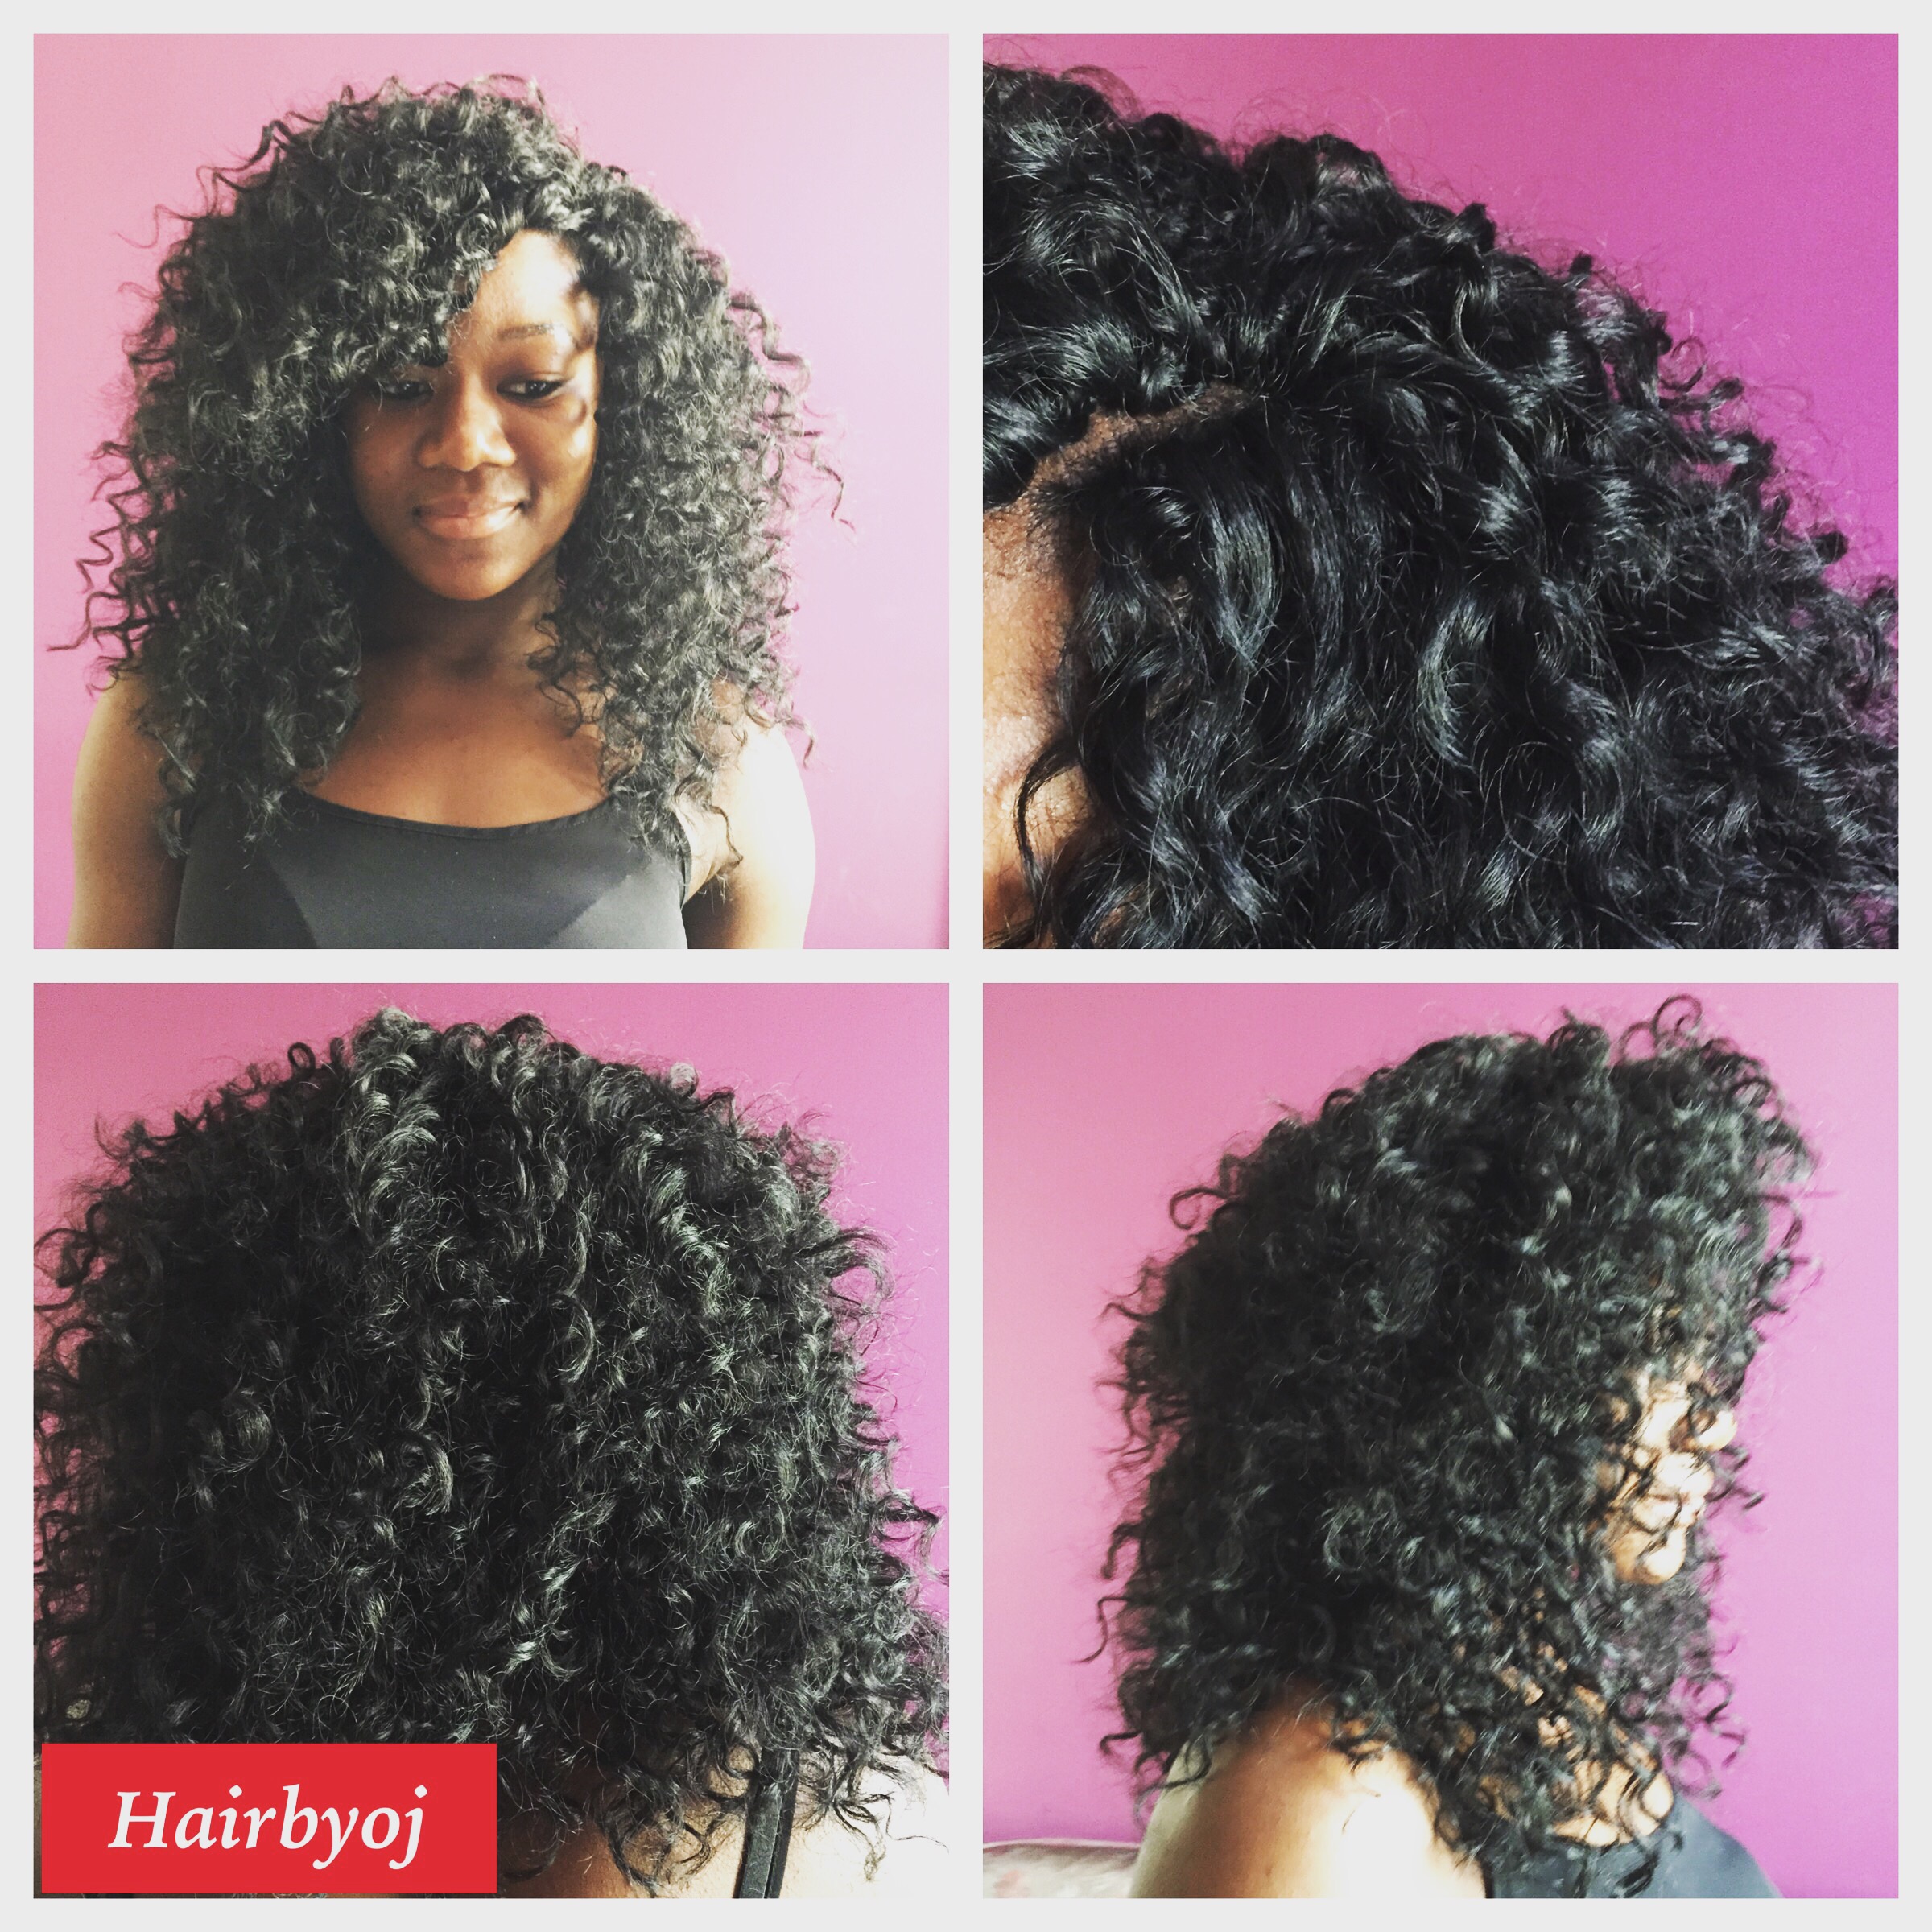 Full Chest length curly hair with side parting « hairbyoj